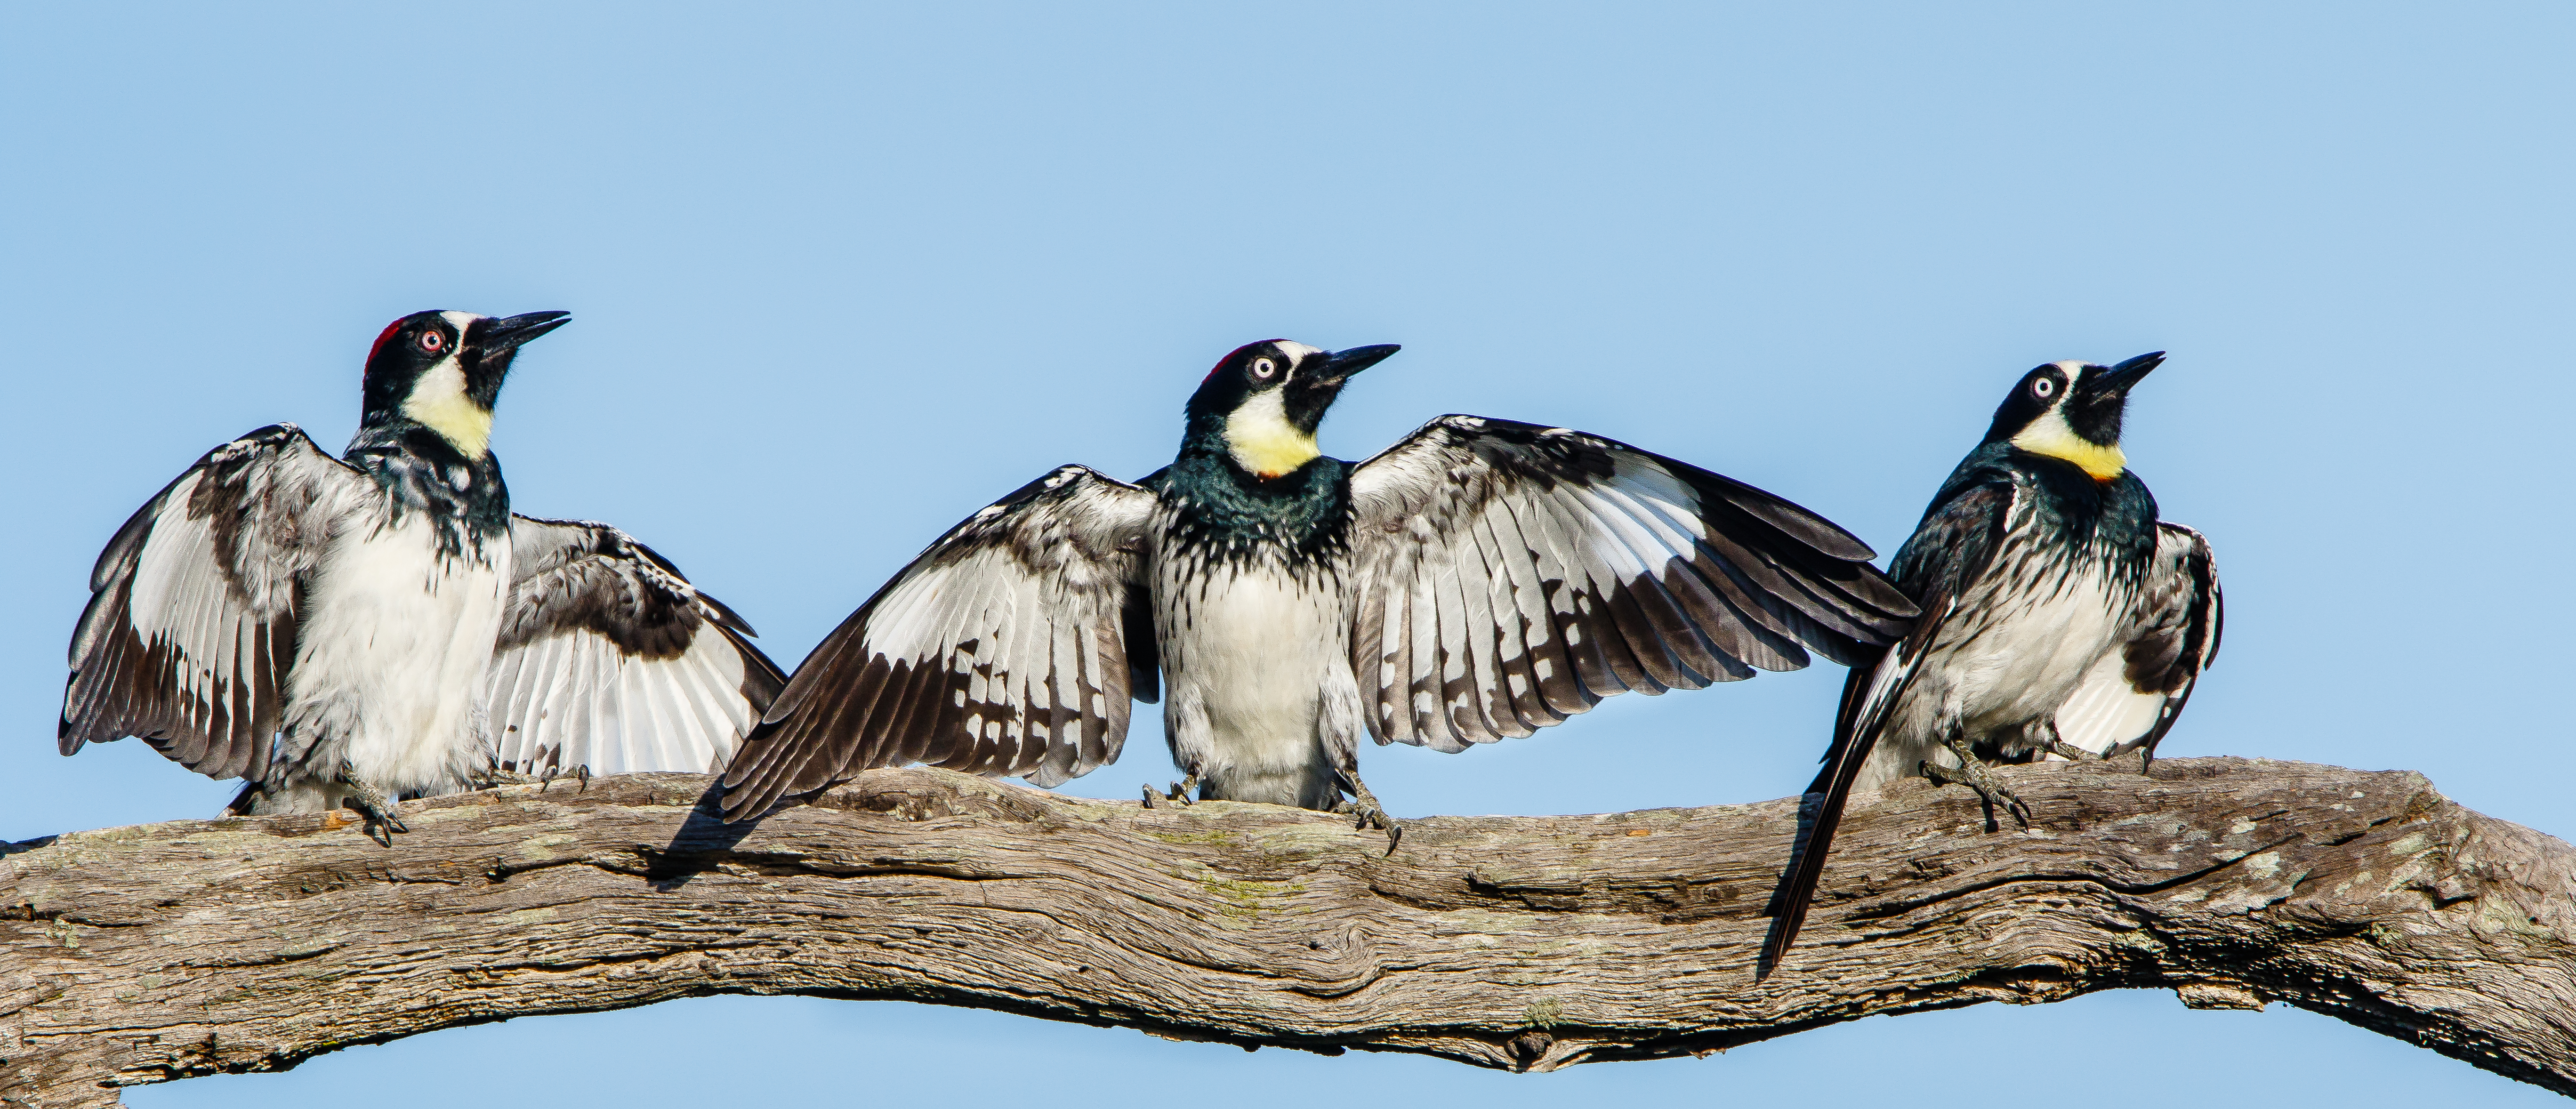 Acorn woodpeckers doing the spread-wing display